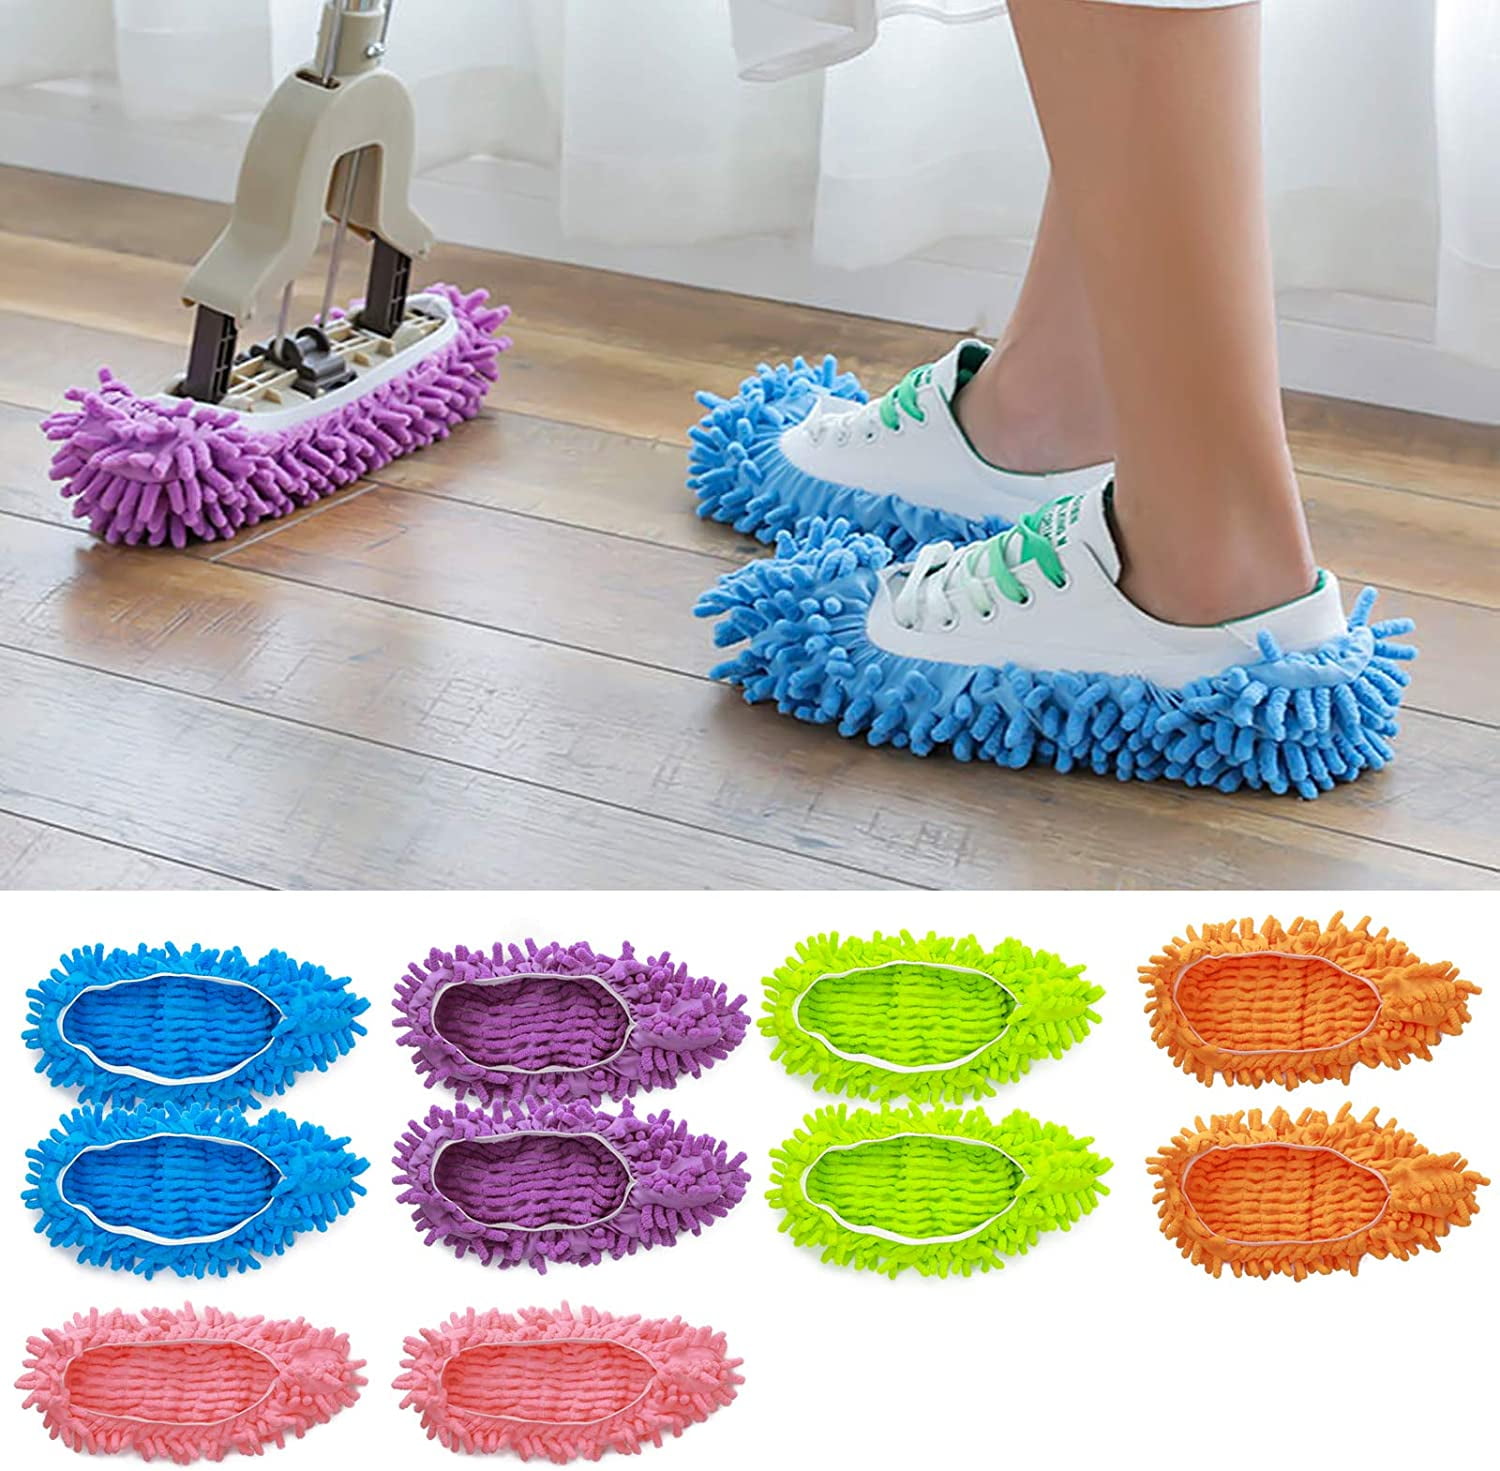 Saiveina Shoe - 10 Mop Slippers Shoes for Floor Cleaning, Washable Dust Slippers for House - Walmart.com